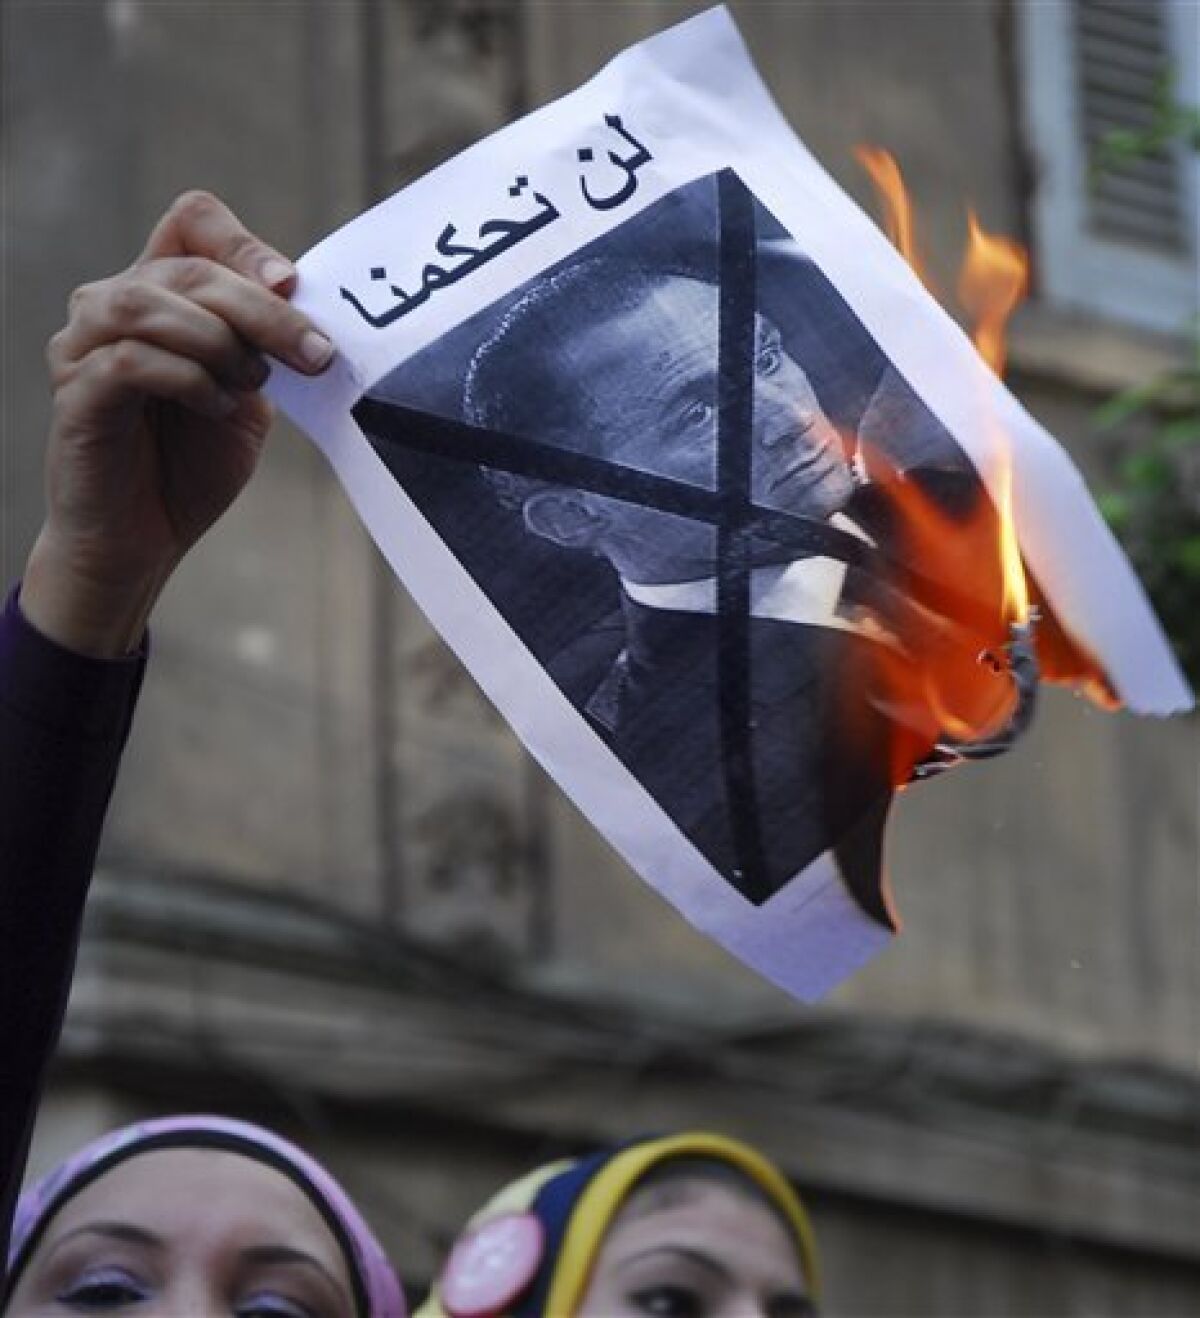 Egyptian activists burn a poster showing Gamal Mubarak, the son of Egyptian President Hosni Mubarak, during a protest in Cairo, Egypt, Tuesday, Sept. 21, 2010. Egyptian police beat and arrested anti-government activists demonstrating outside the downtown presidential palace against a possible father-son succession in the country. (AP Photo)